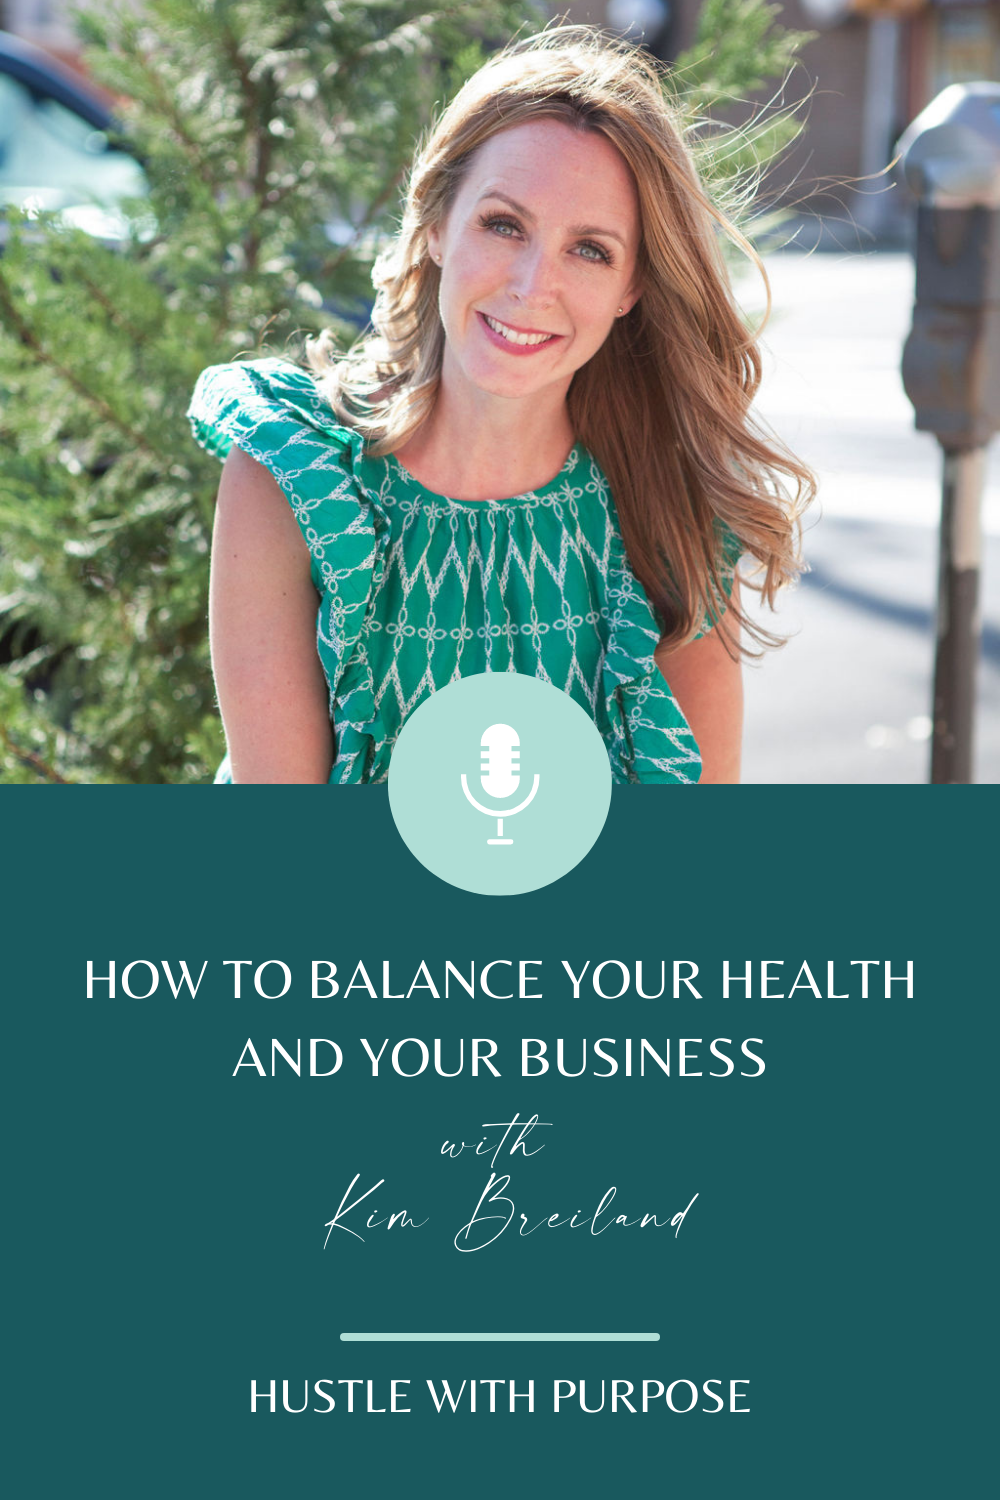 How To Balance Your Health and Your Business with Kim Breiland